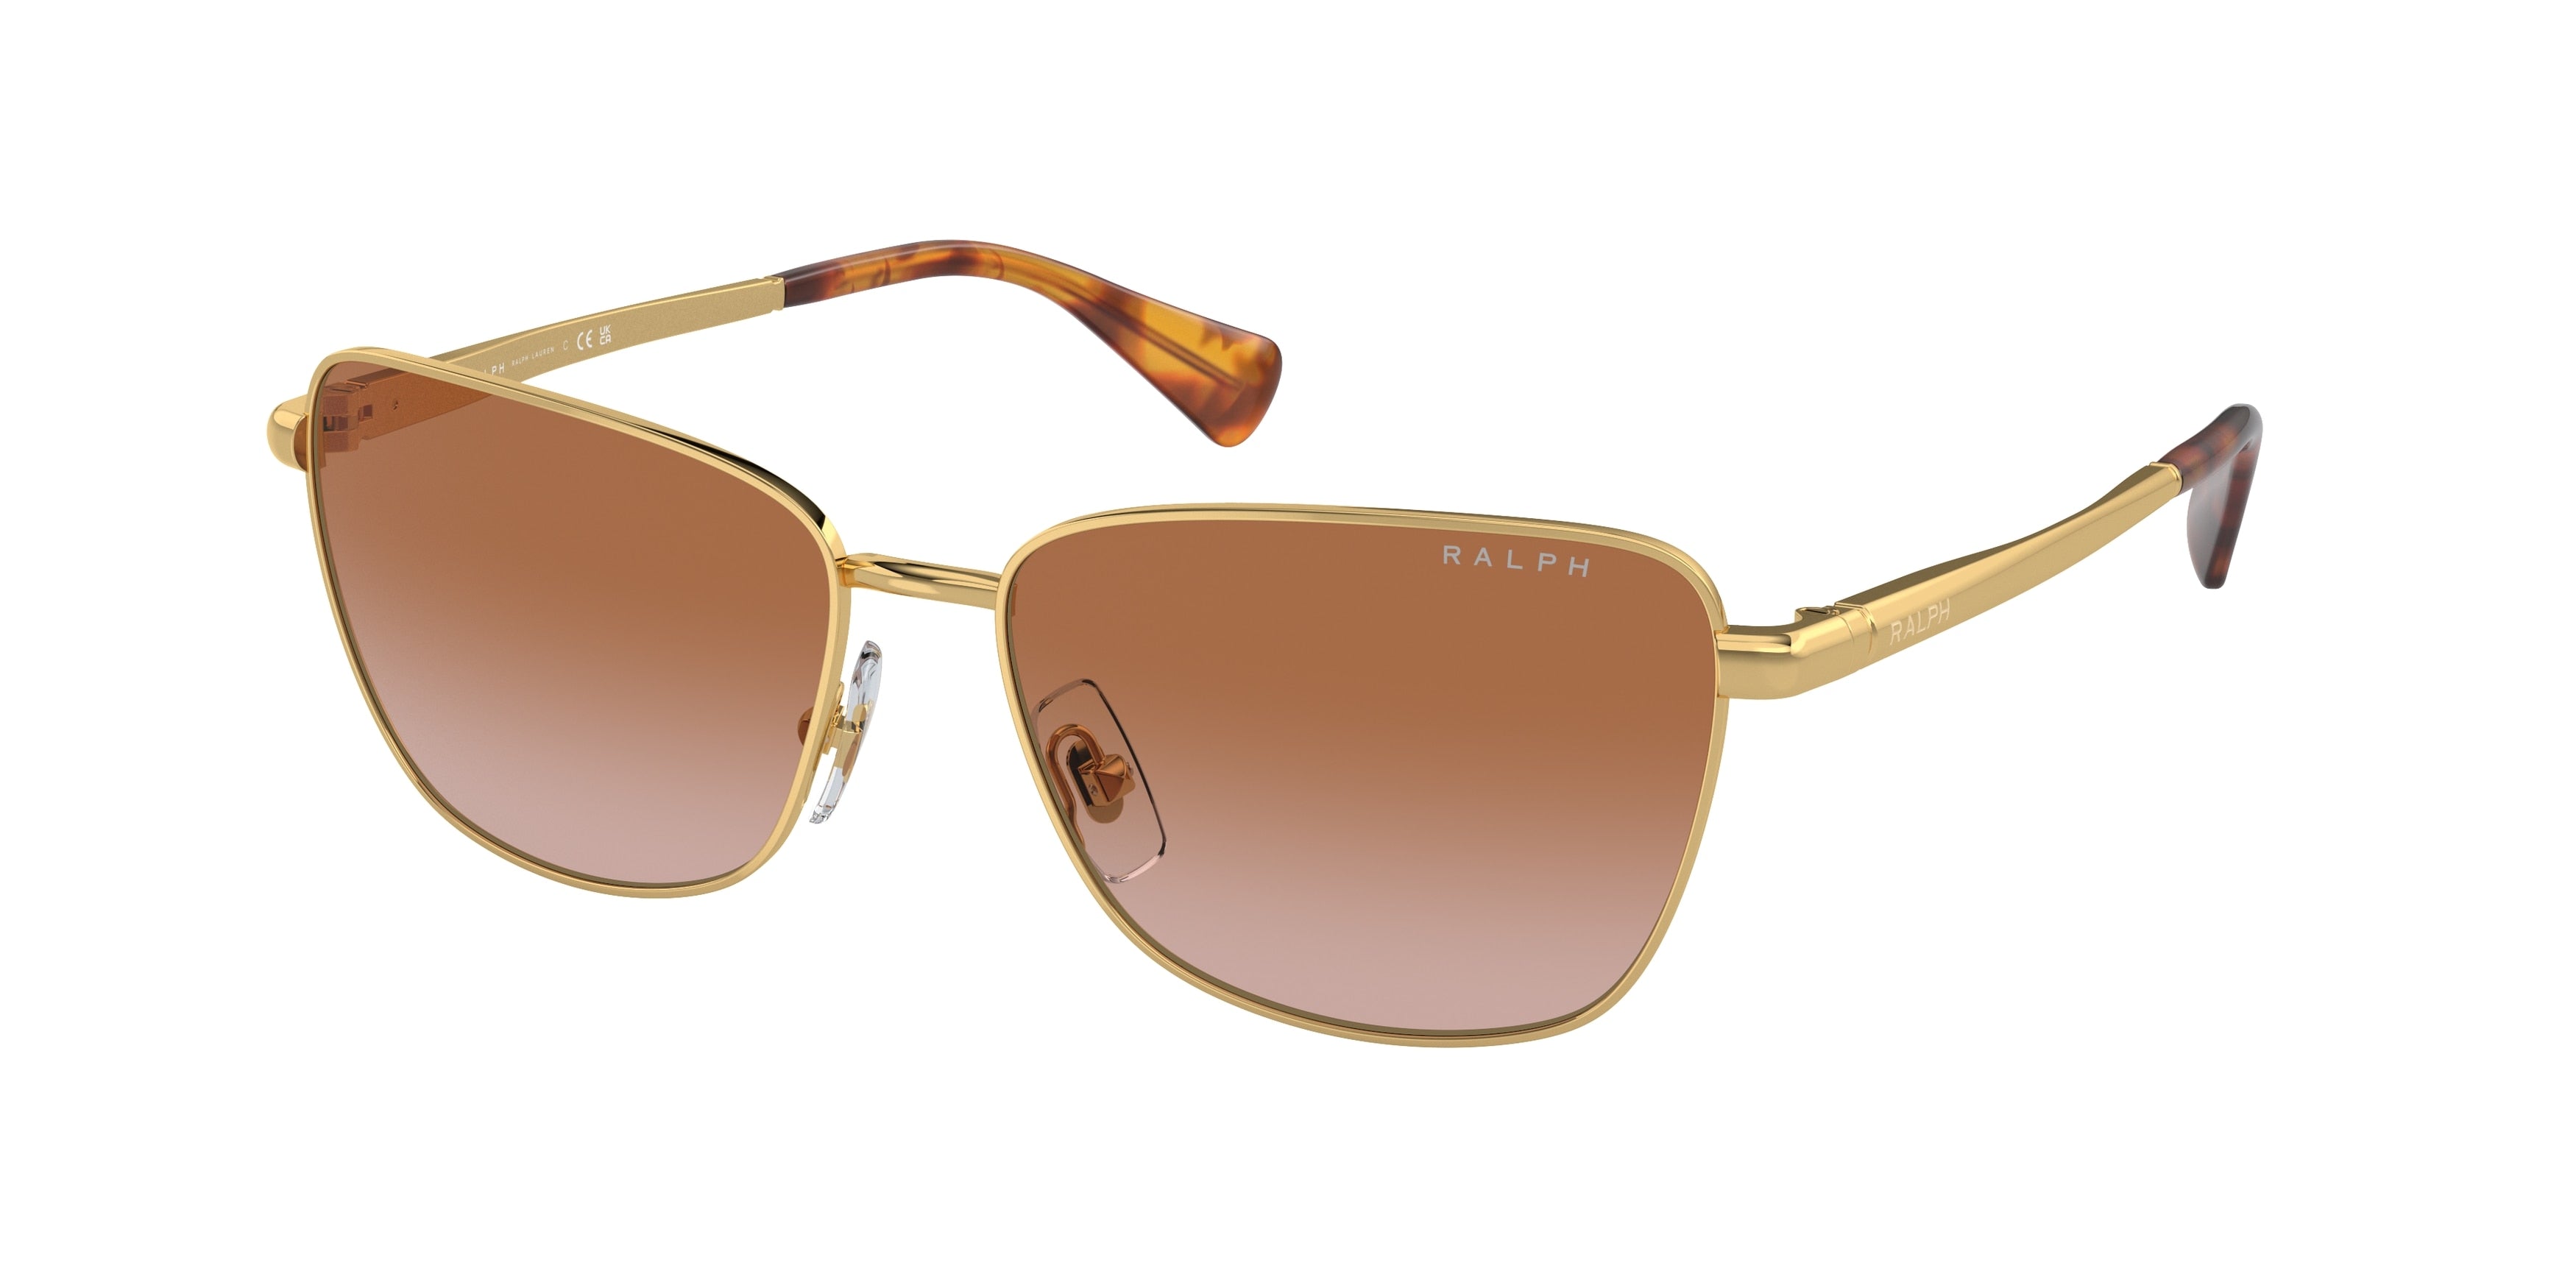 Ralph RA4143 Butterfly Sunglasses  946513-Shiny Gold 57-145-15 - Color Map Gold